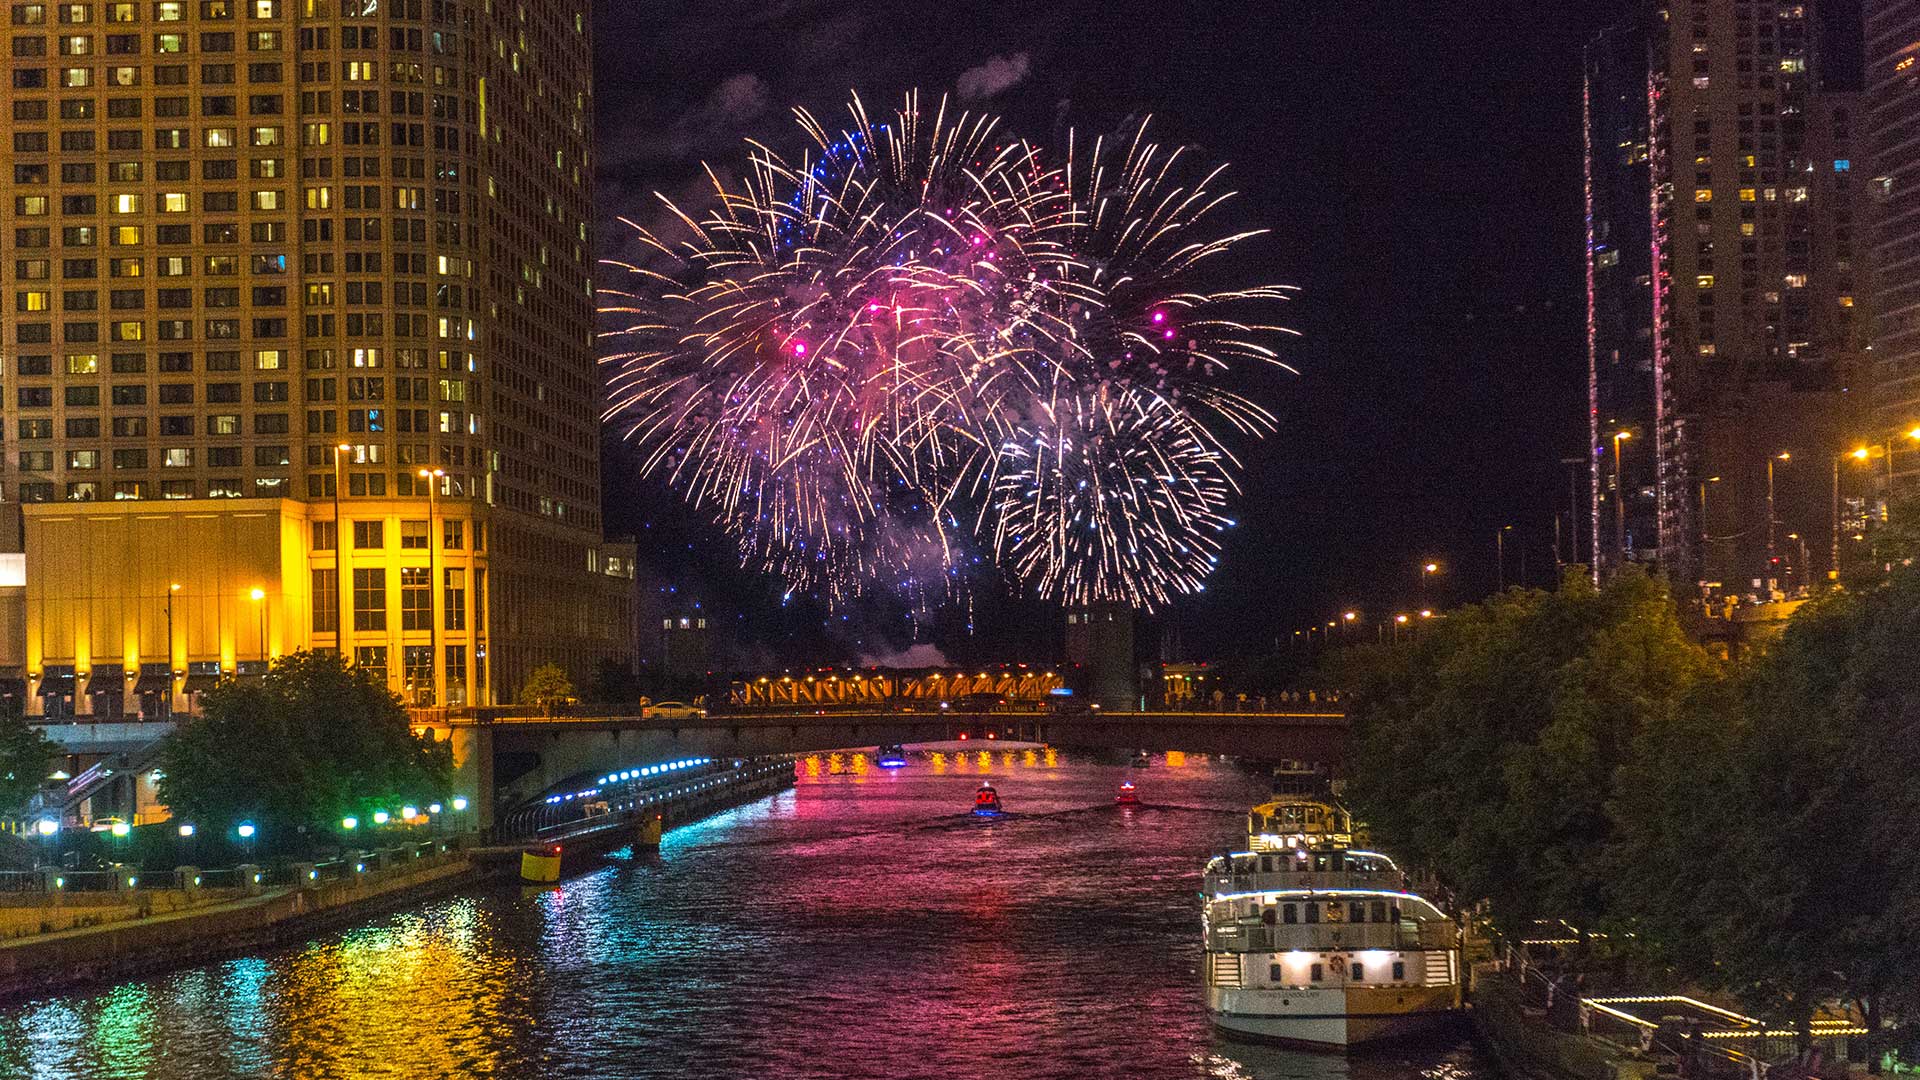 Fireworks light up the night sky over Lake Michigan, as seen from up the Chicago River. There are buildings on both sides of the river and several boats floating.